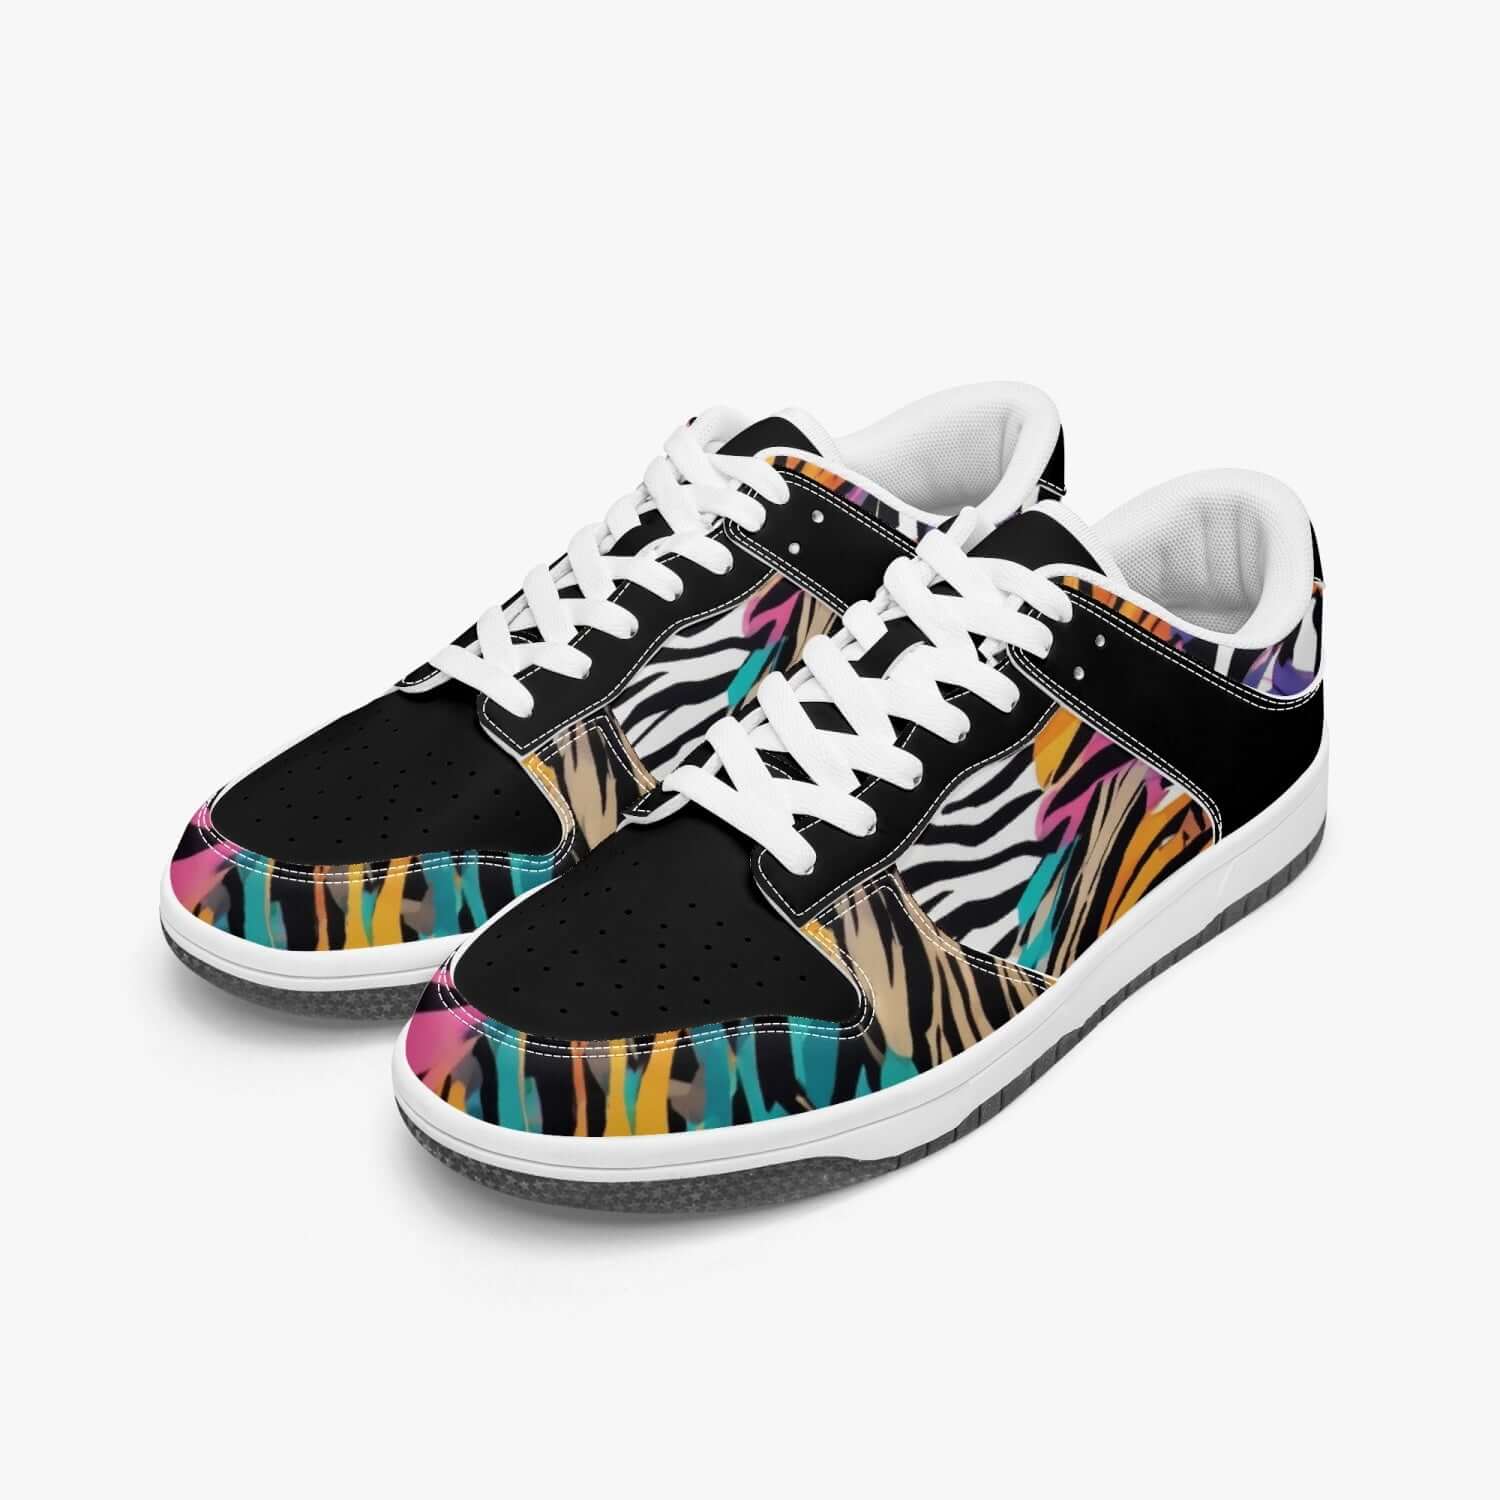 White - Animal Wild Dunk Stylish Low-Top Leather Black Sneakers - unisex sneakers at TFC&H Co.